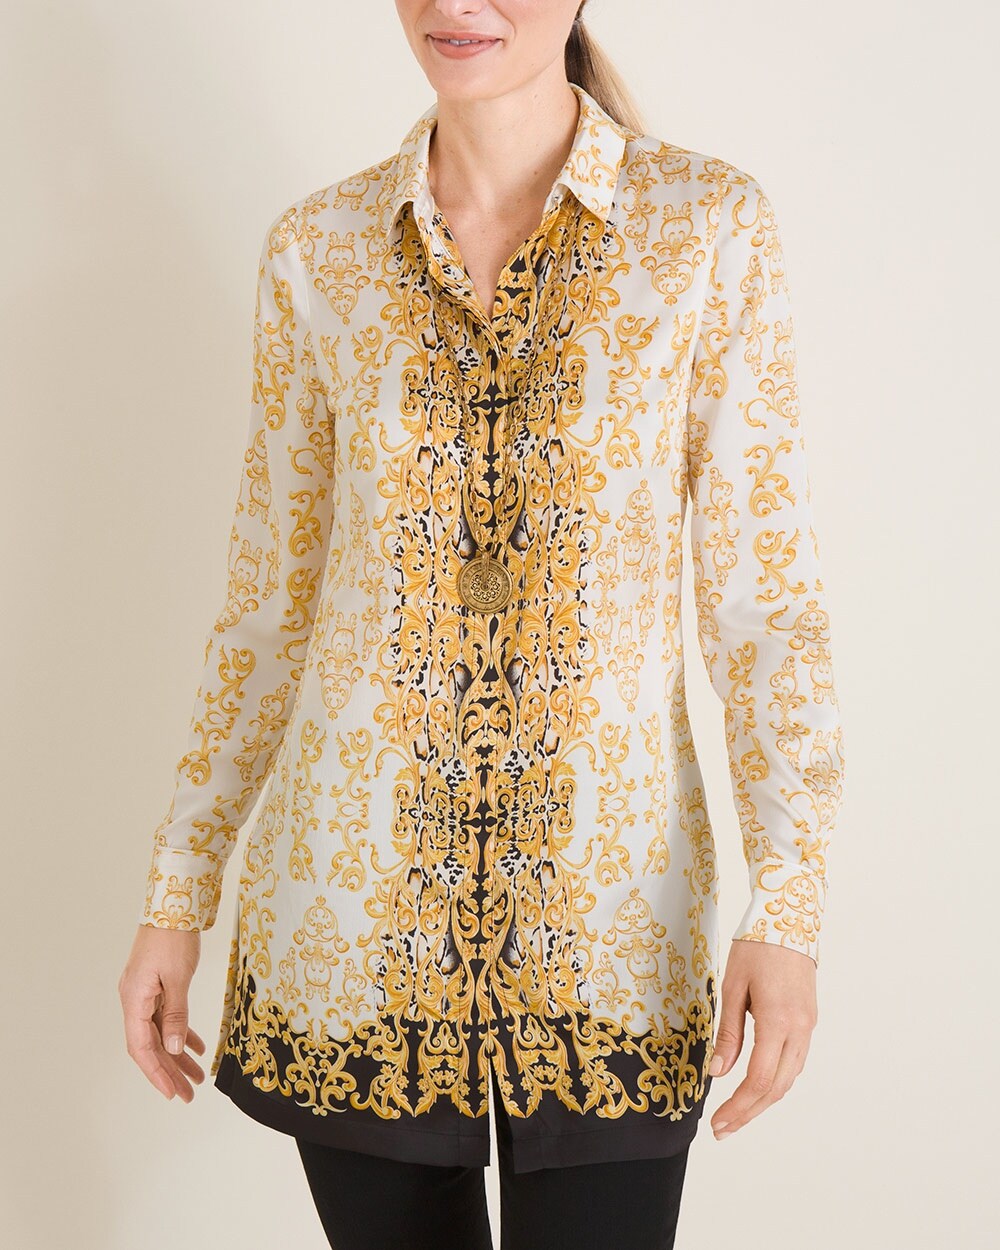 Placed Scroll-Print Tunic Top